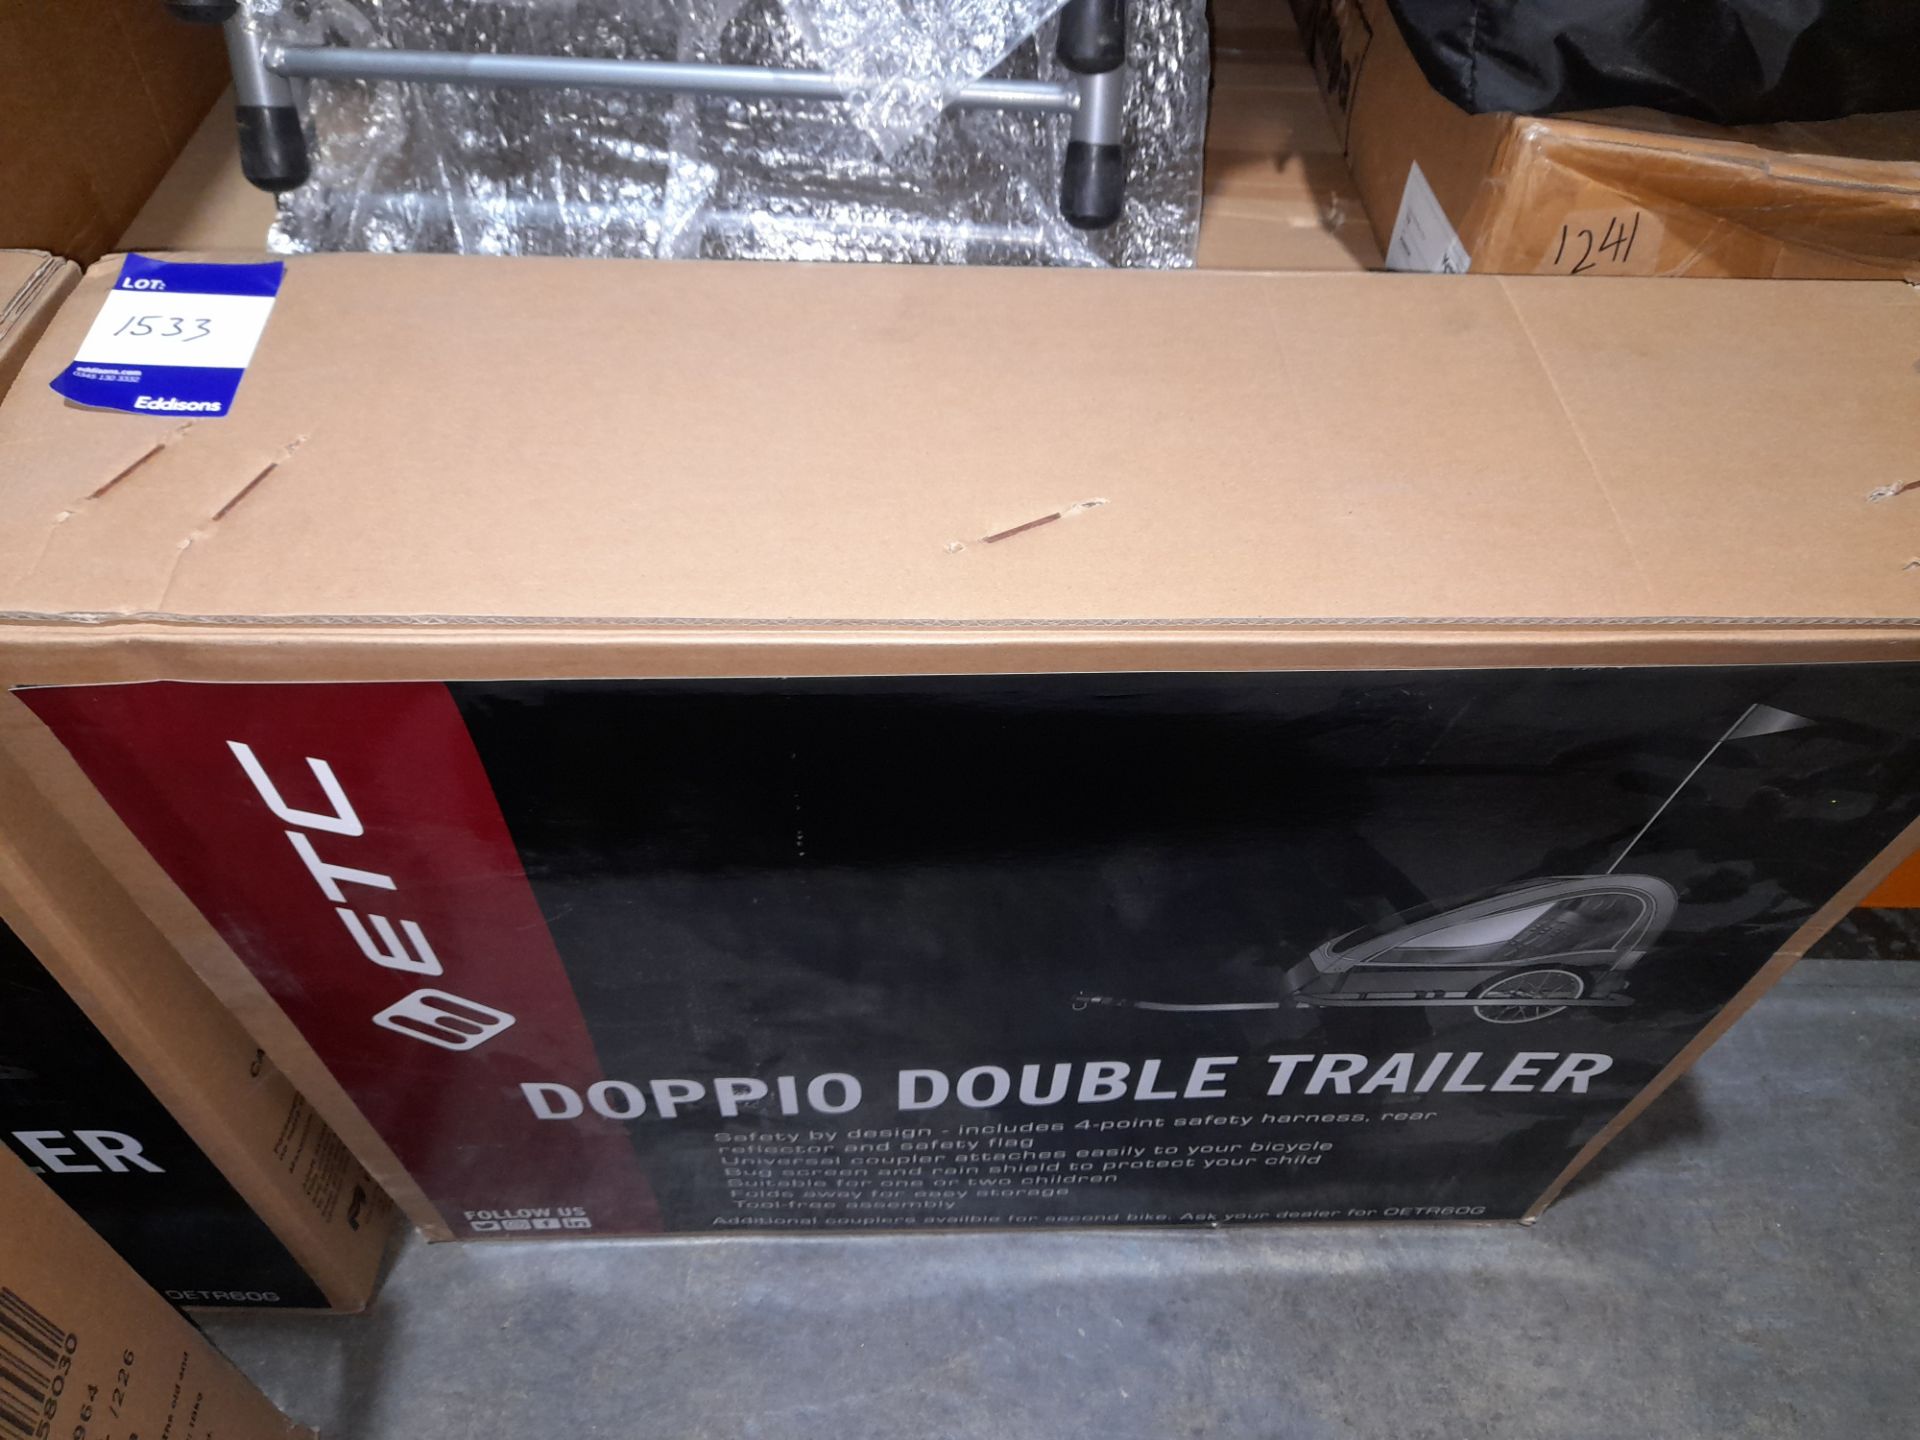 ETC Doppio Double Trailer 20-Inch Wheel (This lot forms part of composite lot 1621 and at the end of - Image 2 of 2